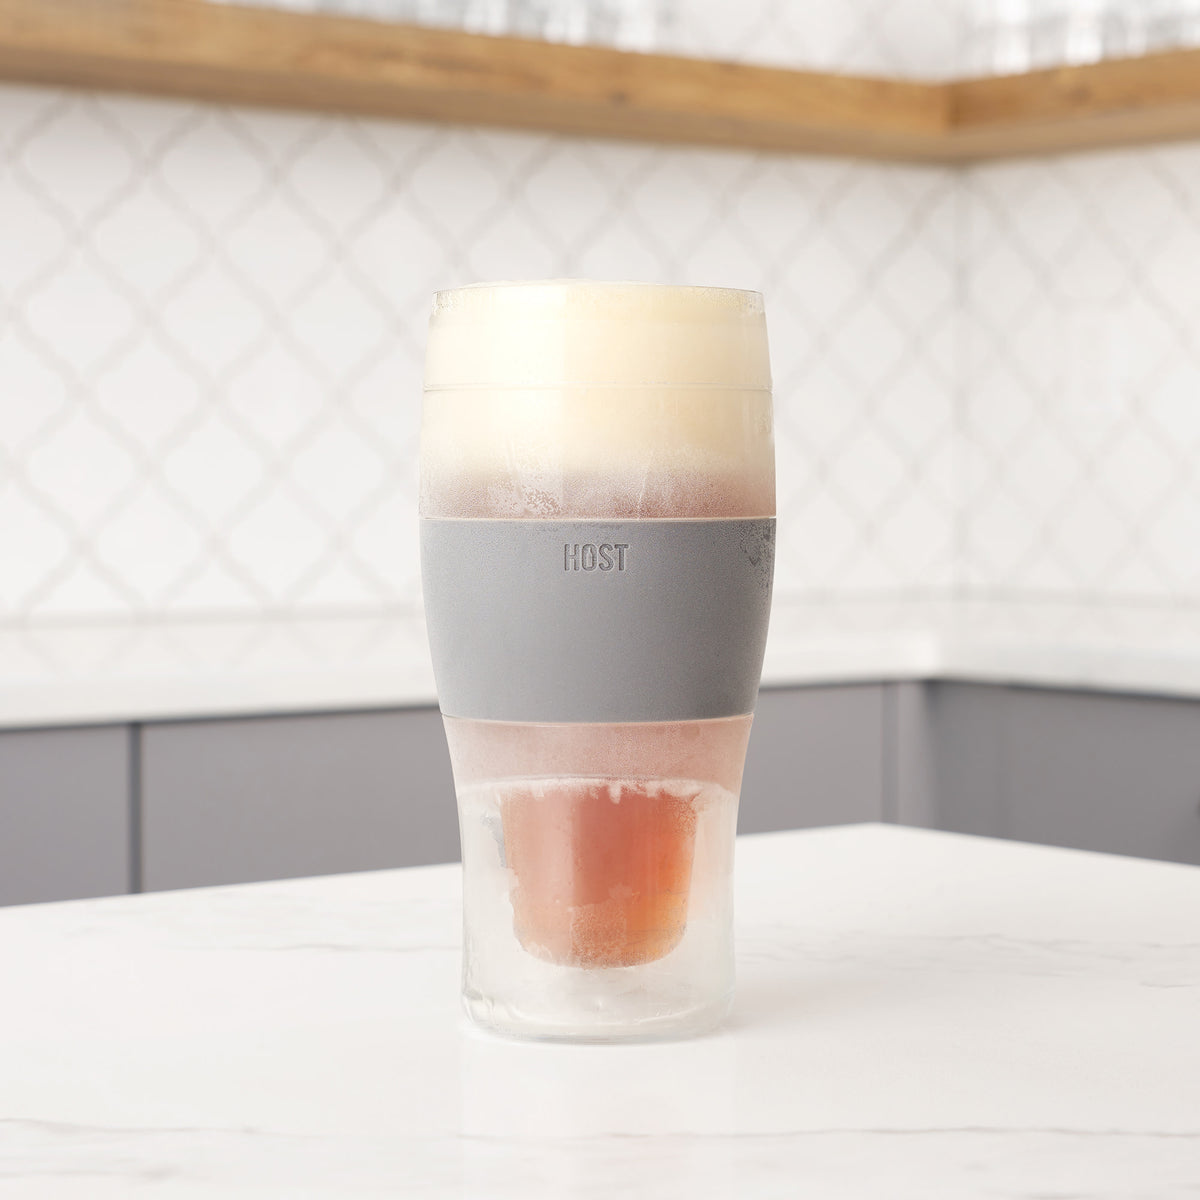 Save nearly 40% on Host Freeze Beer Glasses for Father's Day